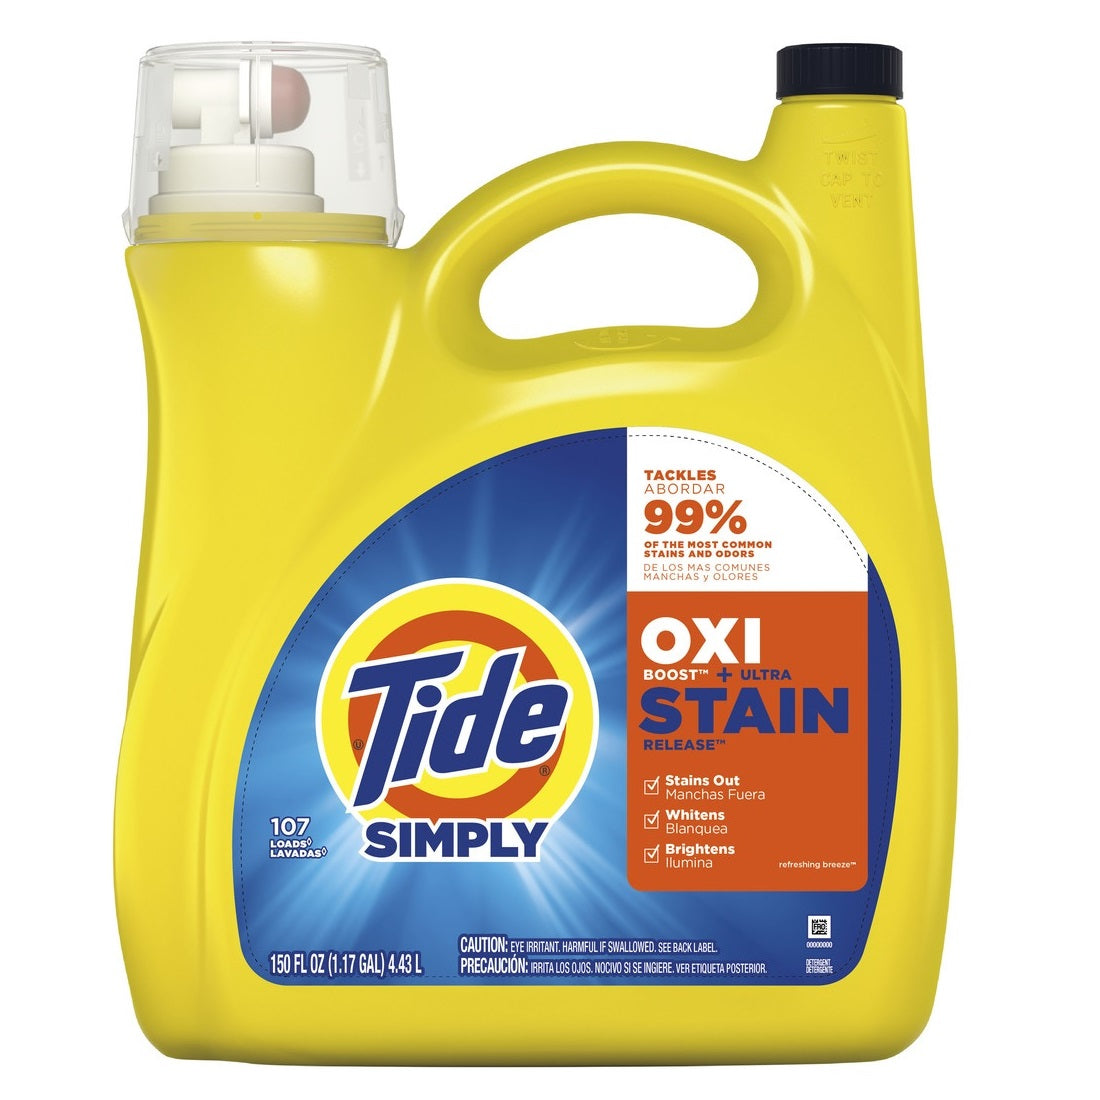 Tide HE Simply Oxi Boost + Ultra Stain Release Refreshing Breeze Scent 107 Loads - 151oz/4pk